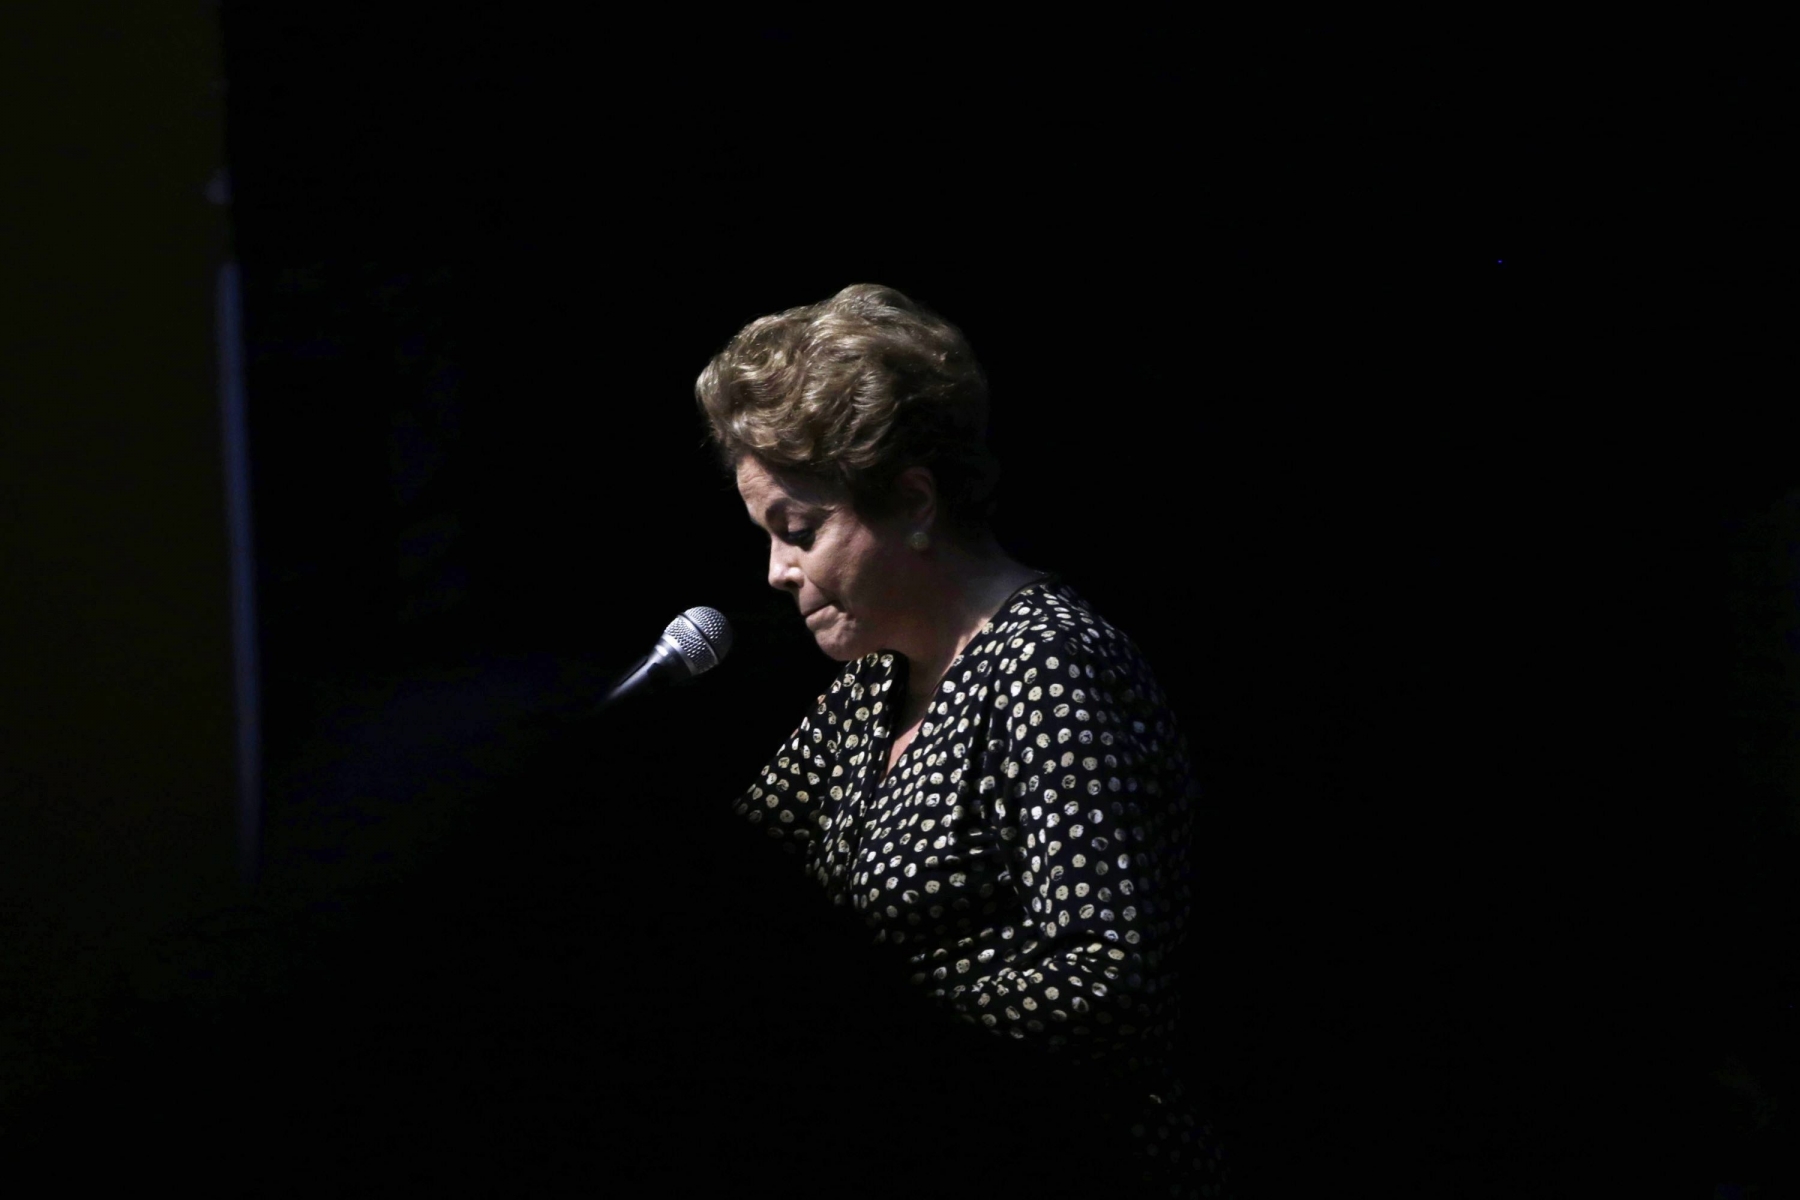 epa05301006 (FILE) A file picture dated 10 May 2016 shows Brazilian President Dilma Rousseff at the opening ceremony of the 4th National Policy Conference on Women in Brasilia, Brazil. The Brazilian Senate on early 12 May 2016 to suspend Rousseff from power as she stands an impeachment trial. Brazil's lower house of Congress voted on 17 April in favor of impeaching Rousseff for allegedly manipulating budget figures to minimize the deficit. Rousseff denies the allegations, insisting the impeachment process is a coup against her.  EPA/FERNANDO BIZERRA JR. FILE BRAZIL CRISIS